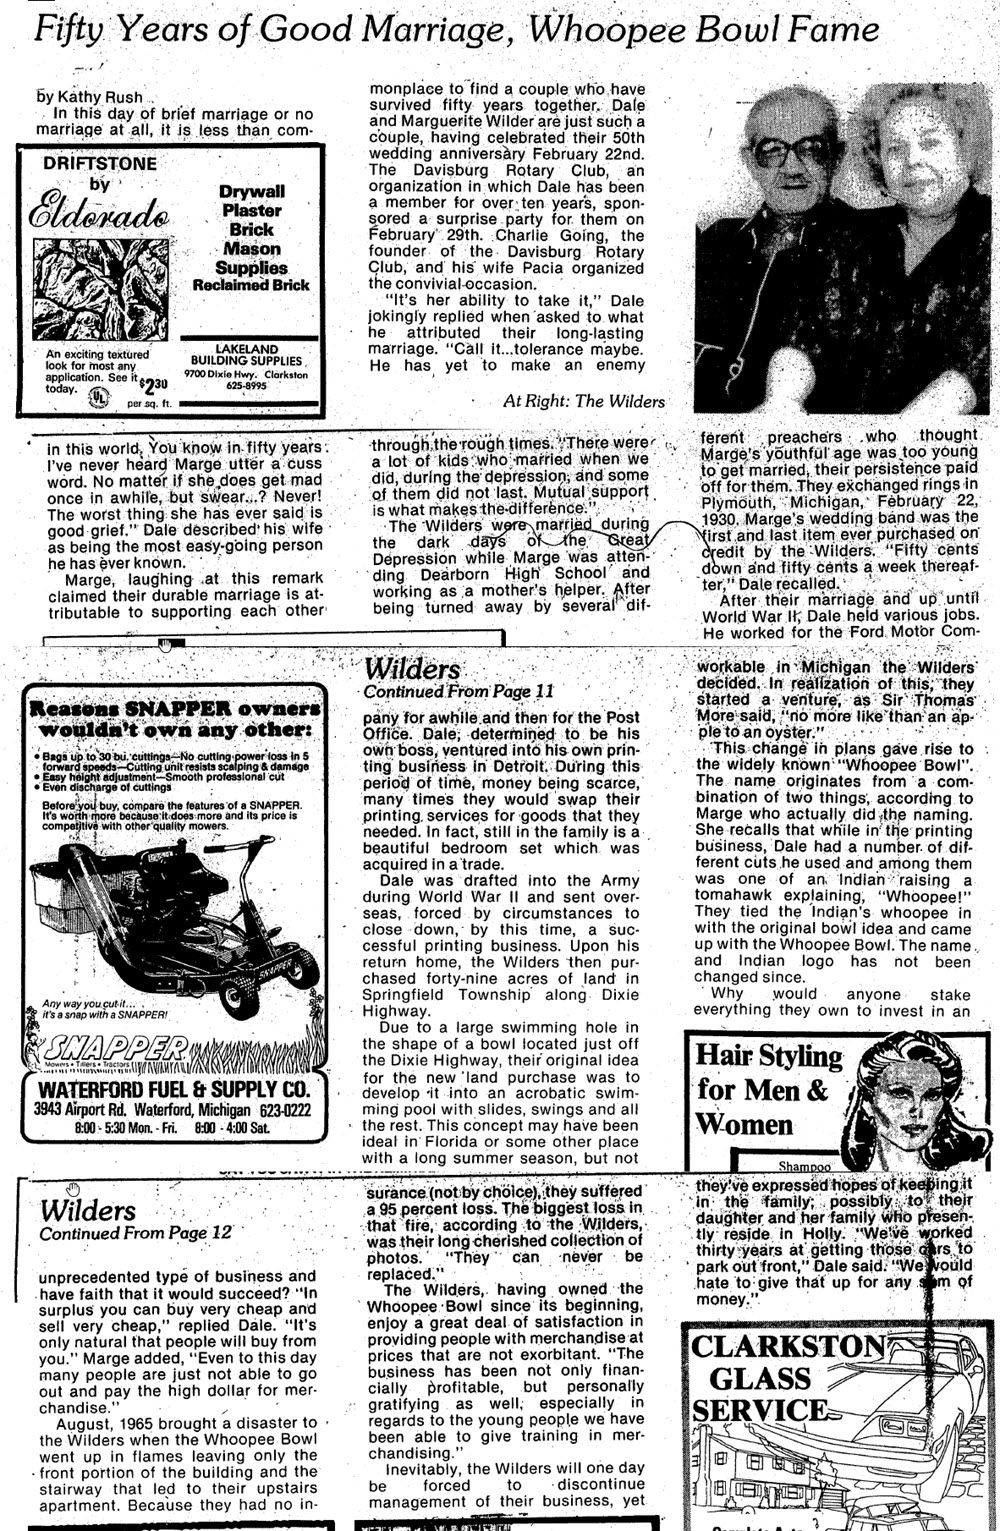 Whoopee Bowl - April 1980 Article On Wilders